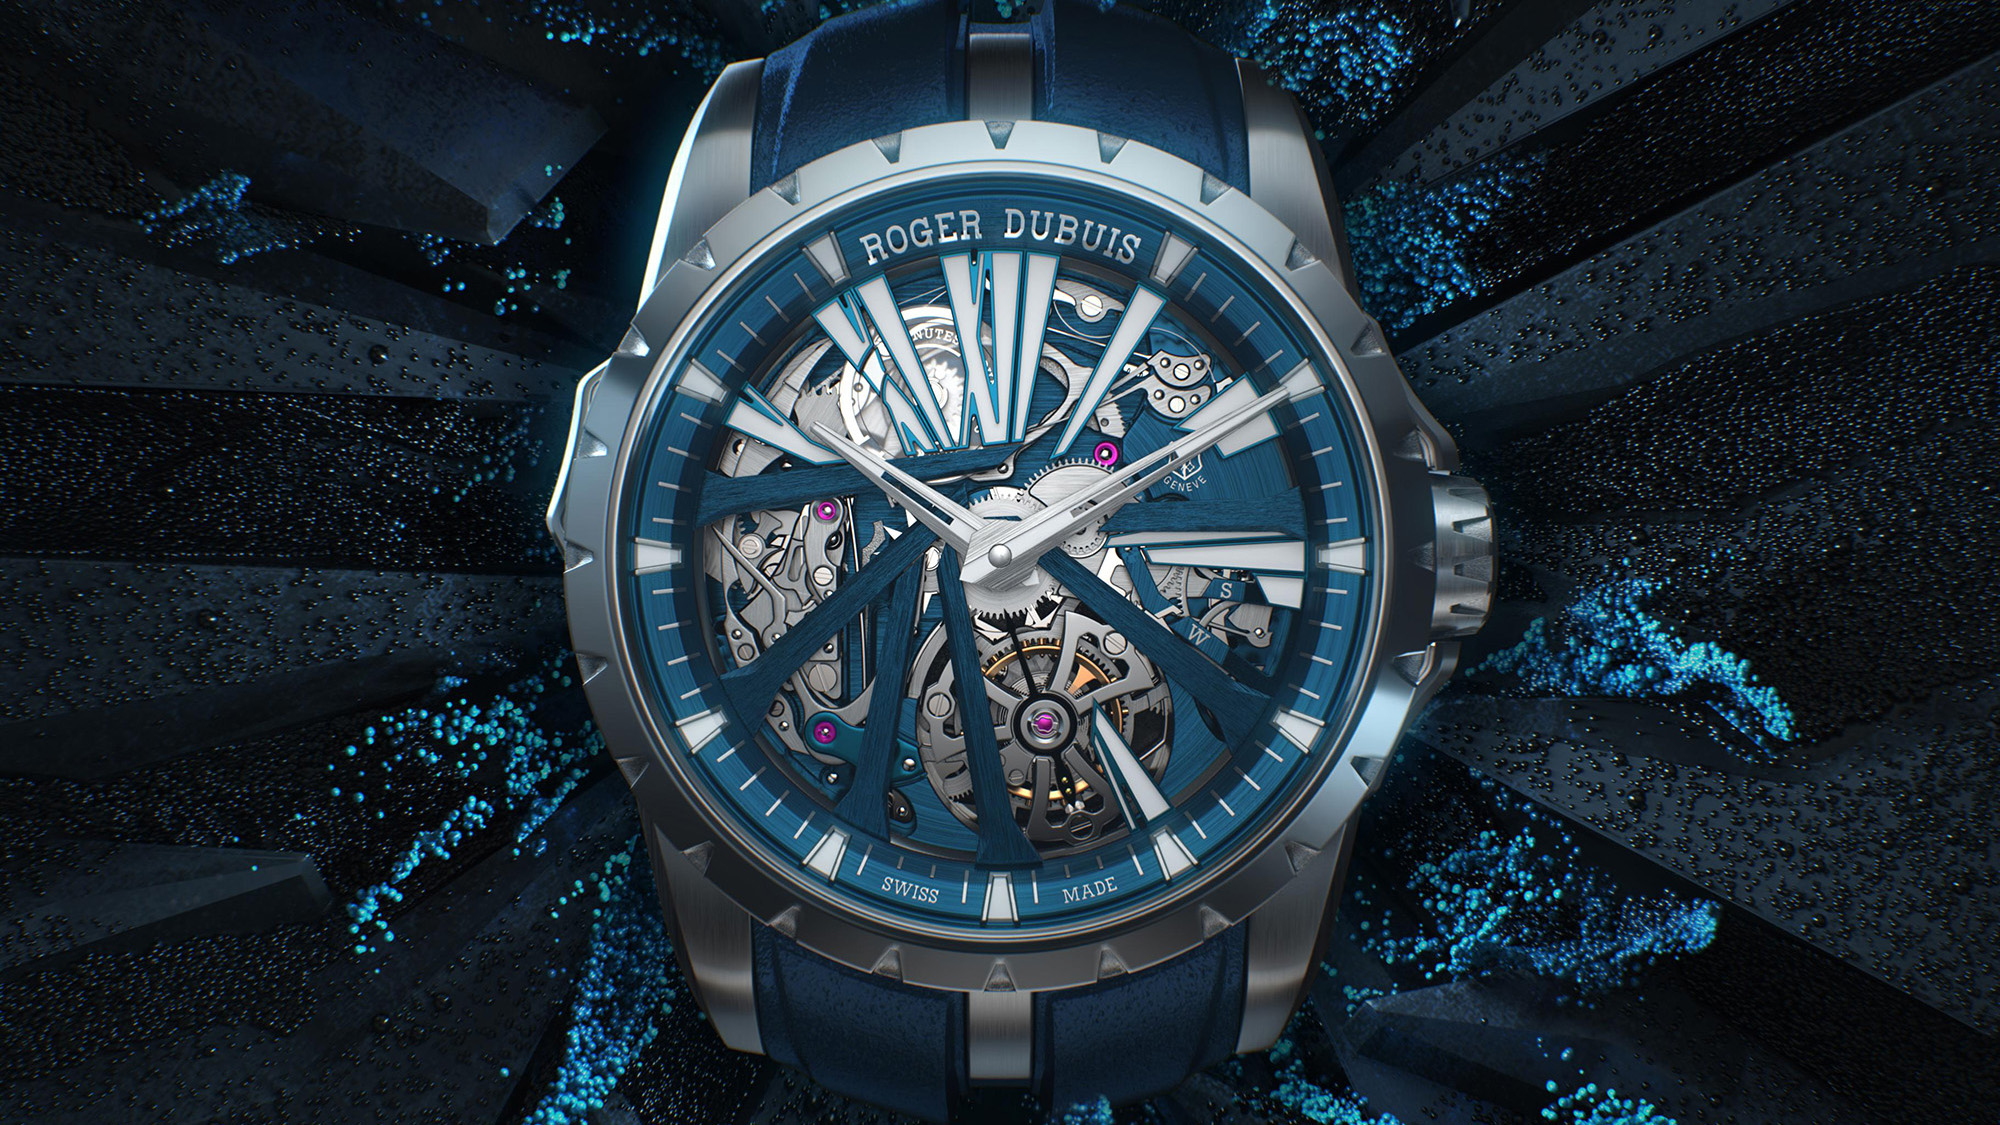 The Roger Dubuis Excalibur Diabolus in Machina Flying Tourbillon Minute Repeater in CarTech Micro-Melt BioDur CCM.